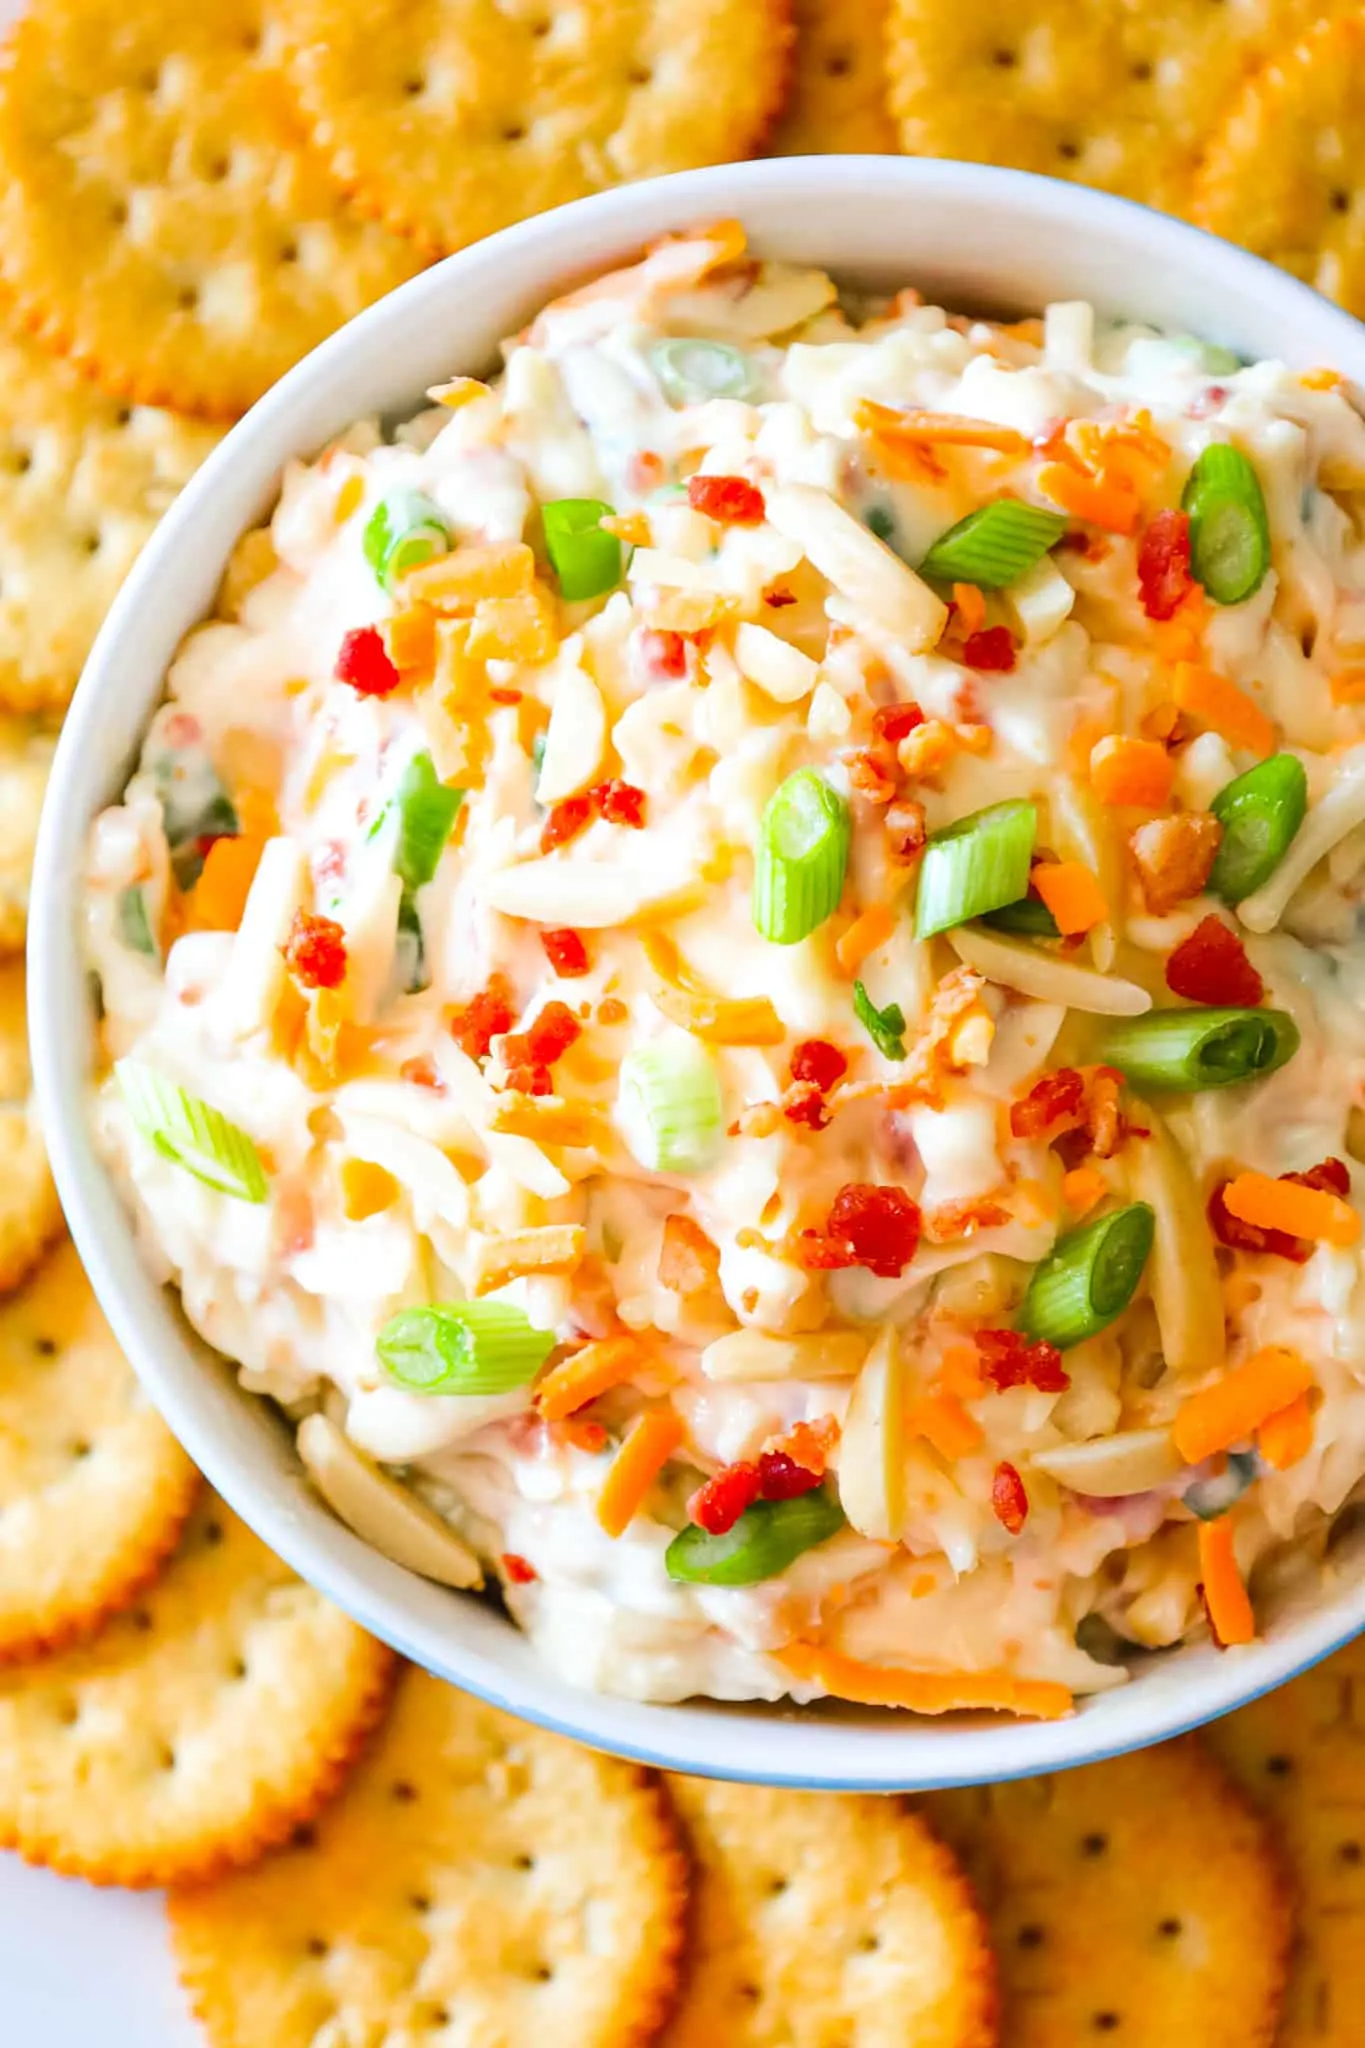 Million Dollar Dip is a delicious cold party dip recipe loaded with crumbled bacon, slivered almonds, chopped green onions, mayo, parmesan, mozzarella and cheddar cheese.